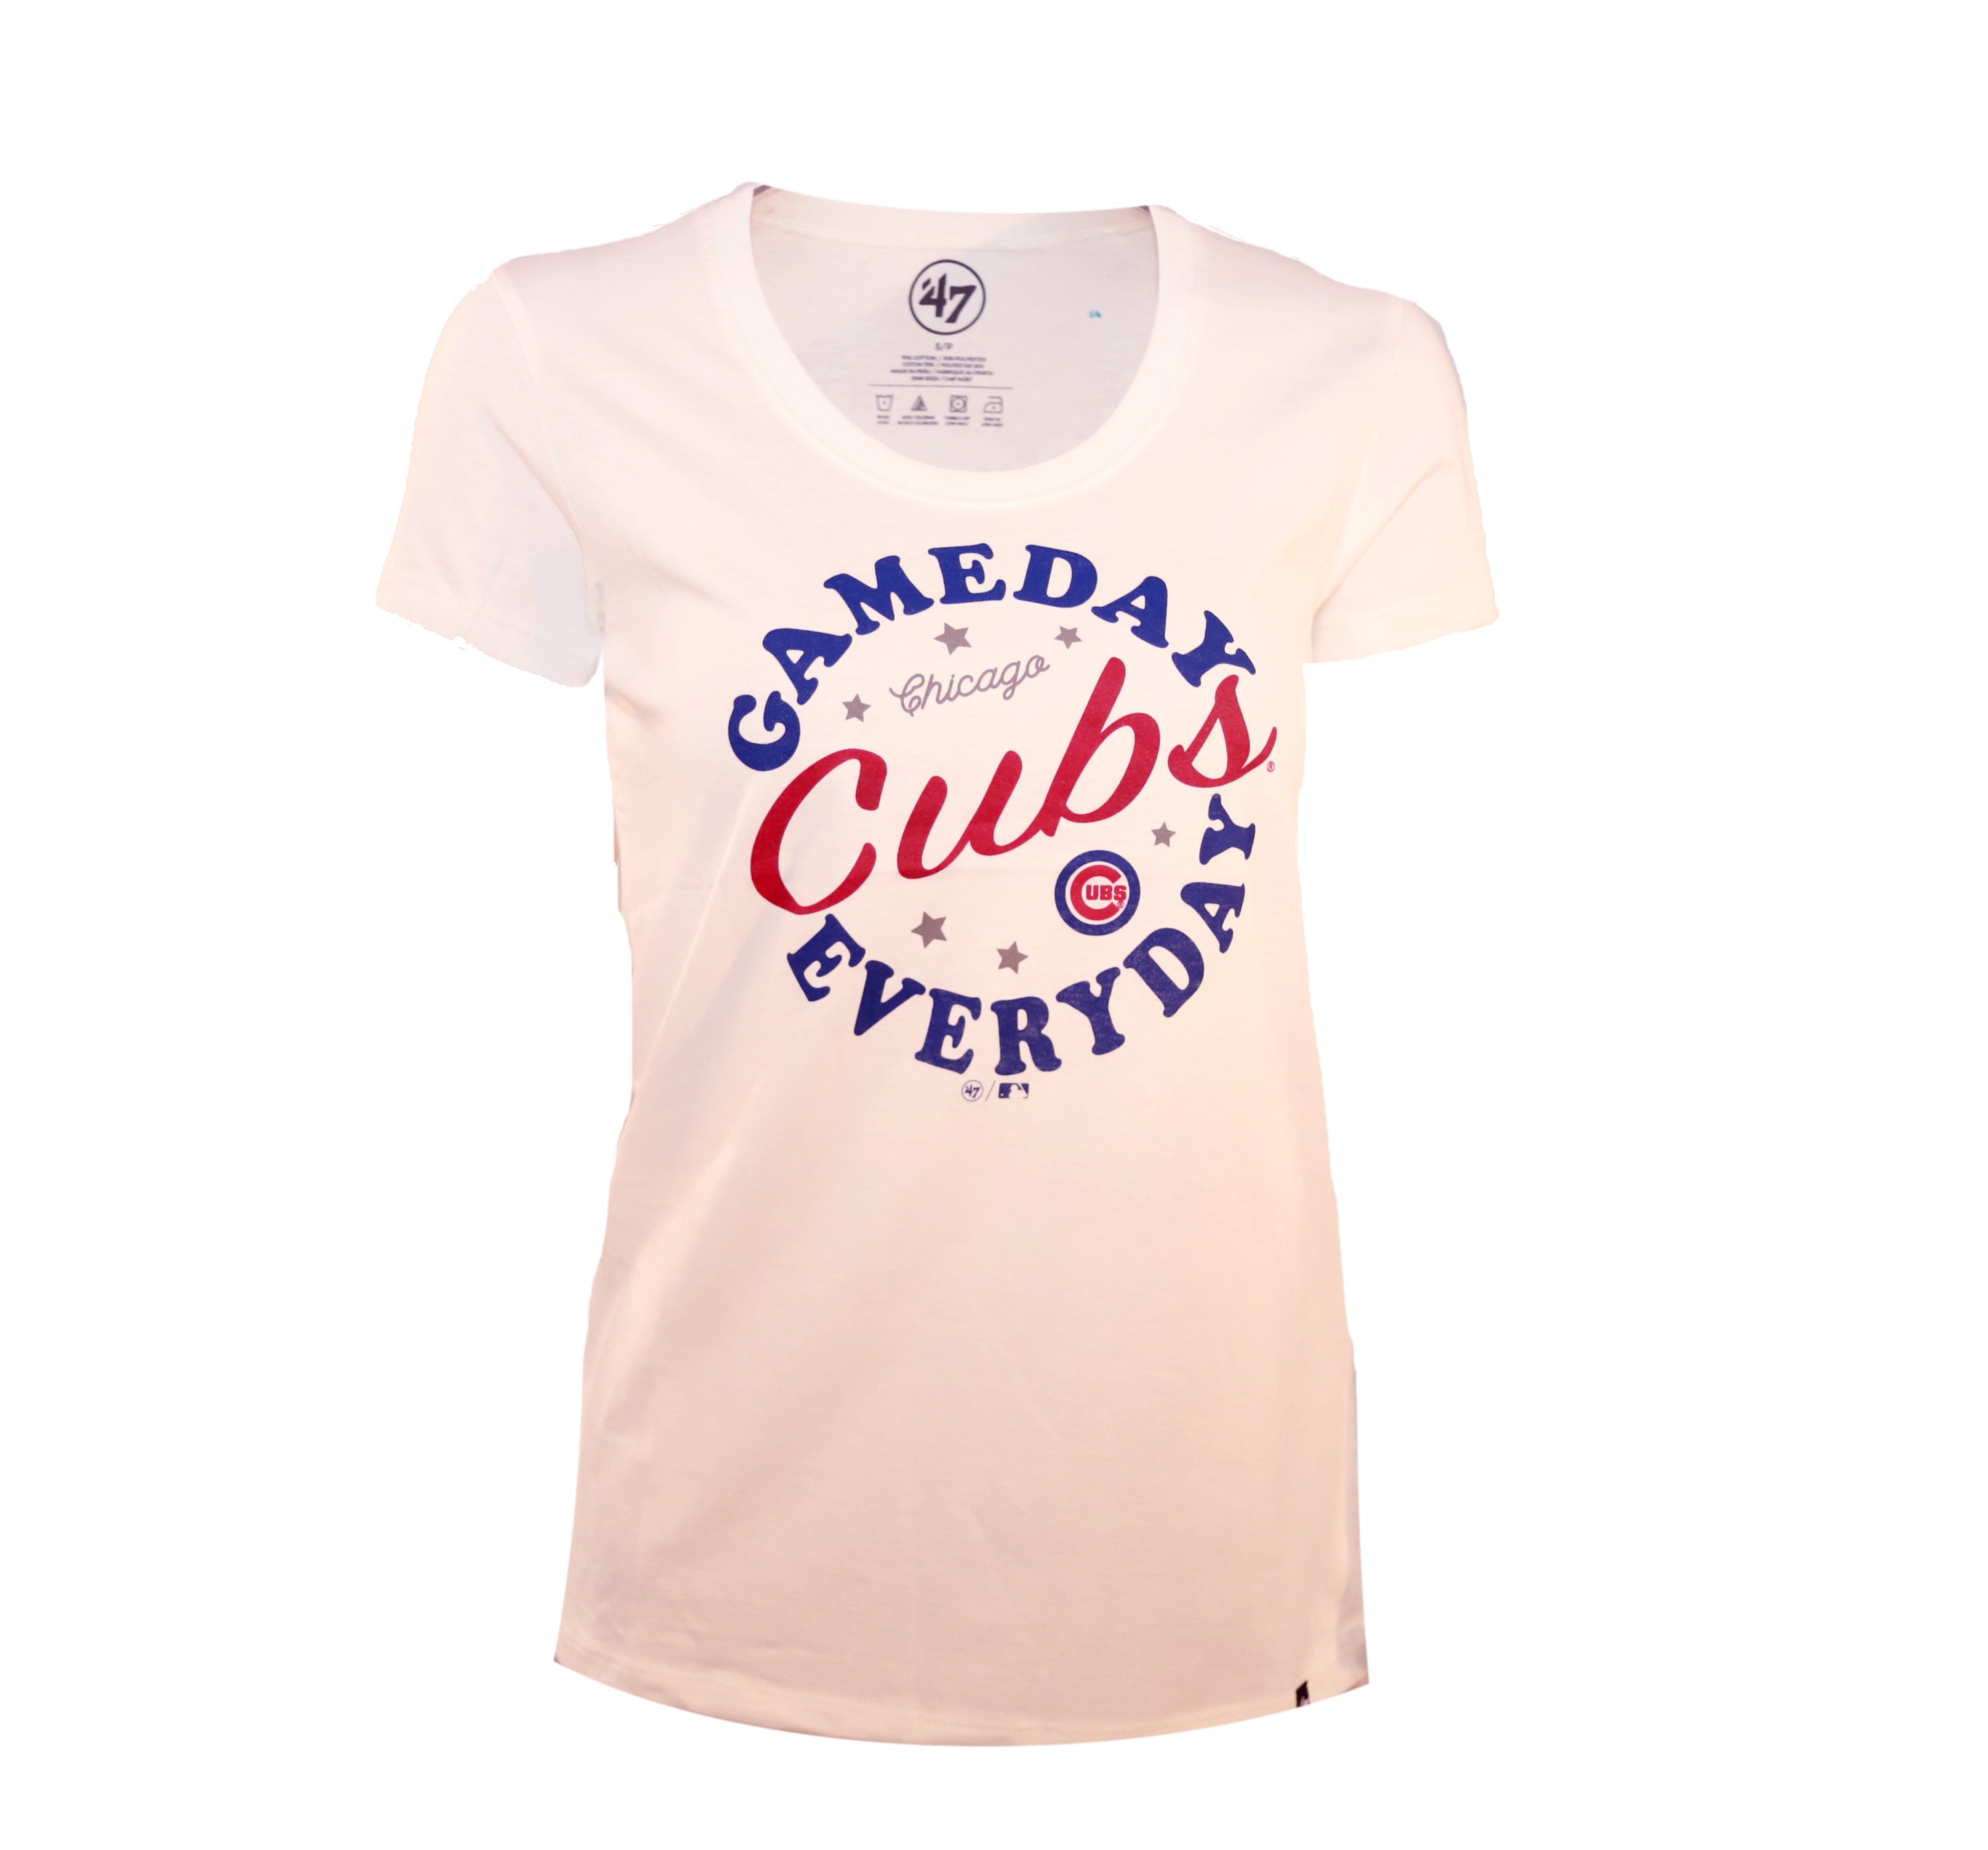 Chicago Cubs Girls Youth Ball Striped T-Shirt - White